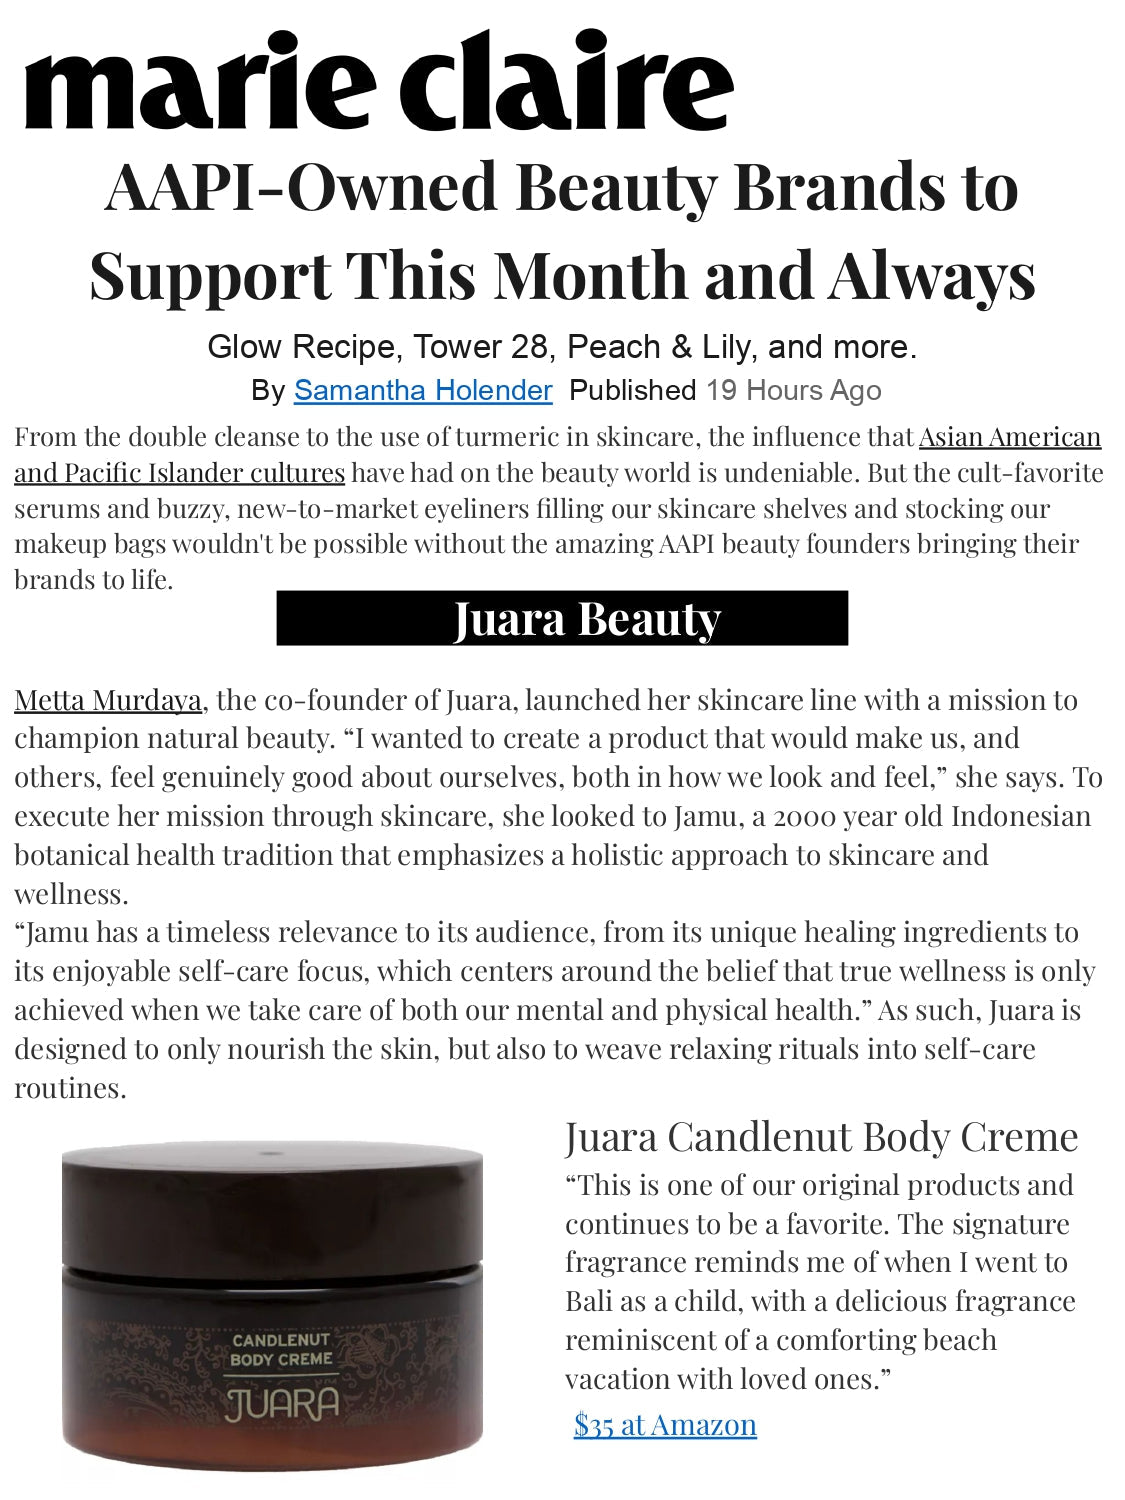 MARIE CLAIRE: AAPI-Owned Beauty Brands to Support This Month and Always JUARA Skincare